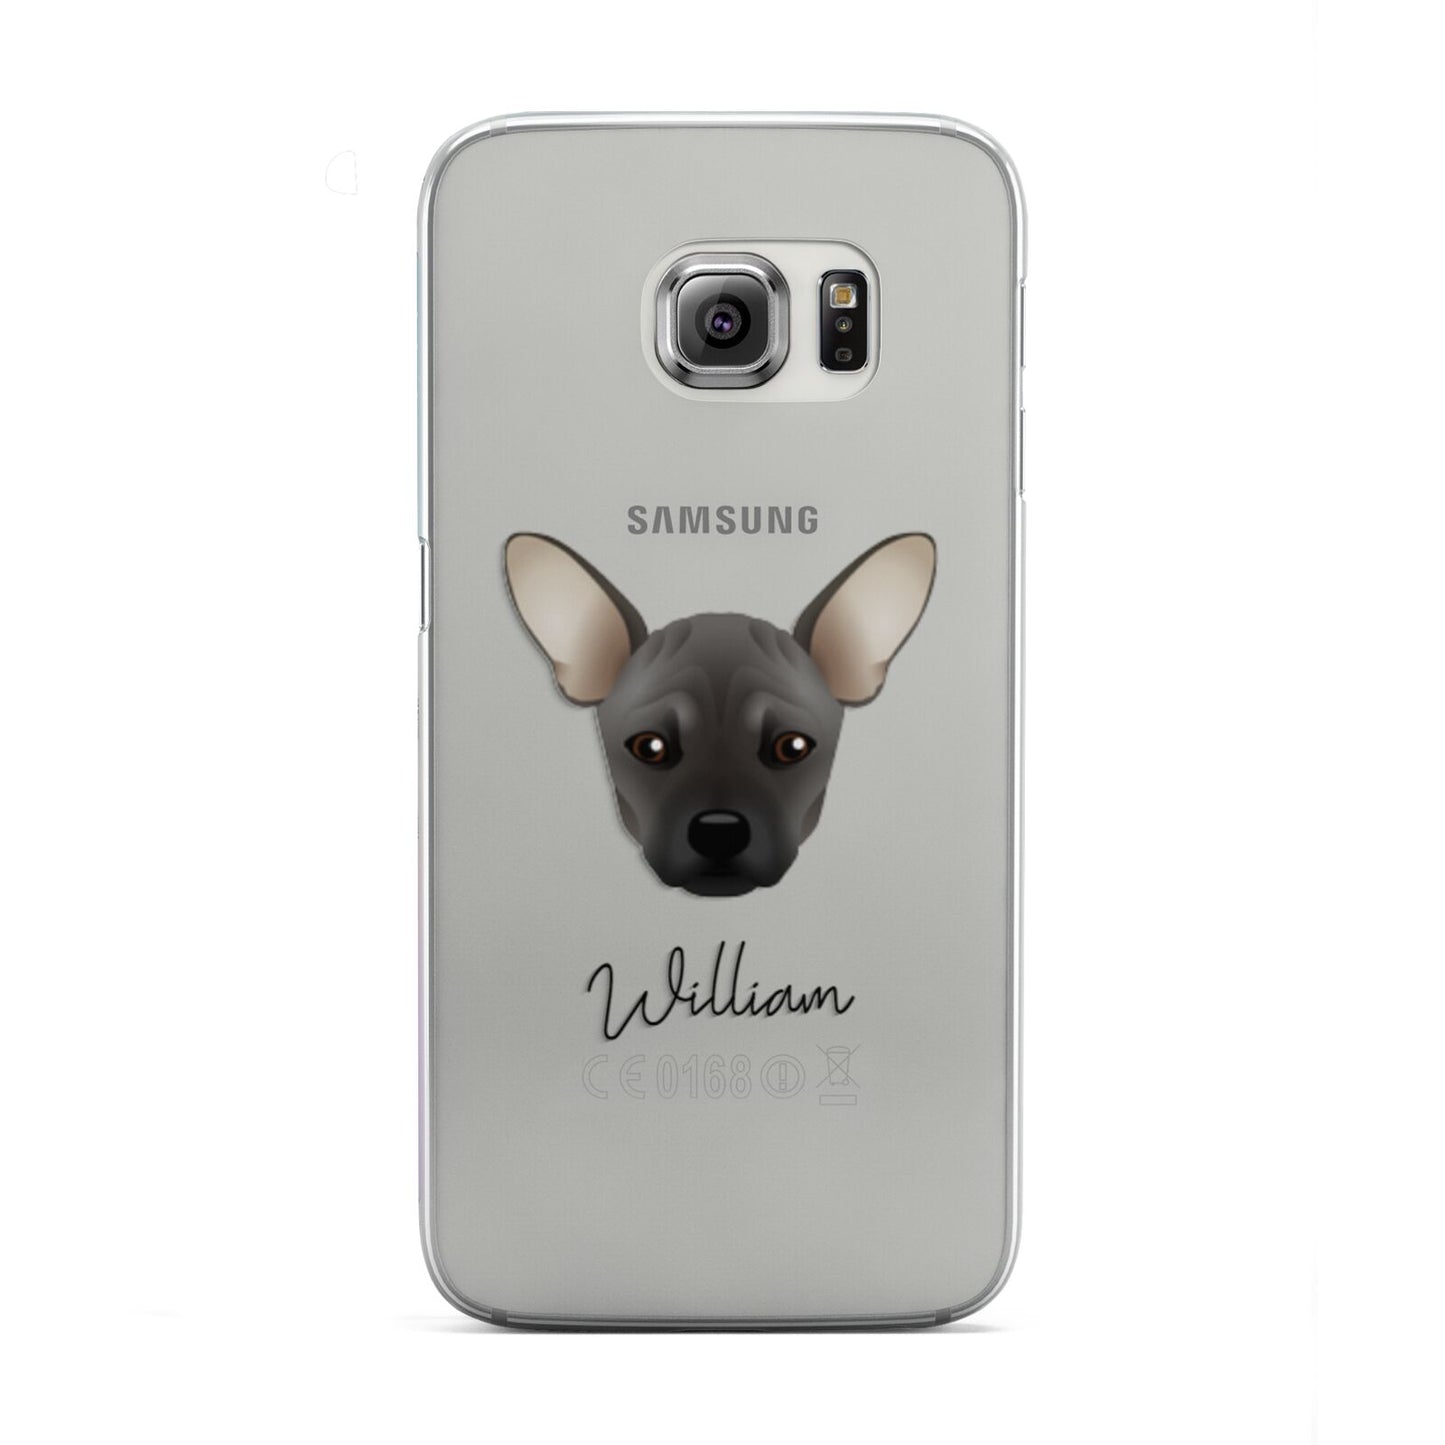 French Pin Personalised Samsung Galaxy S6 Edge Case